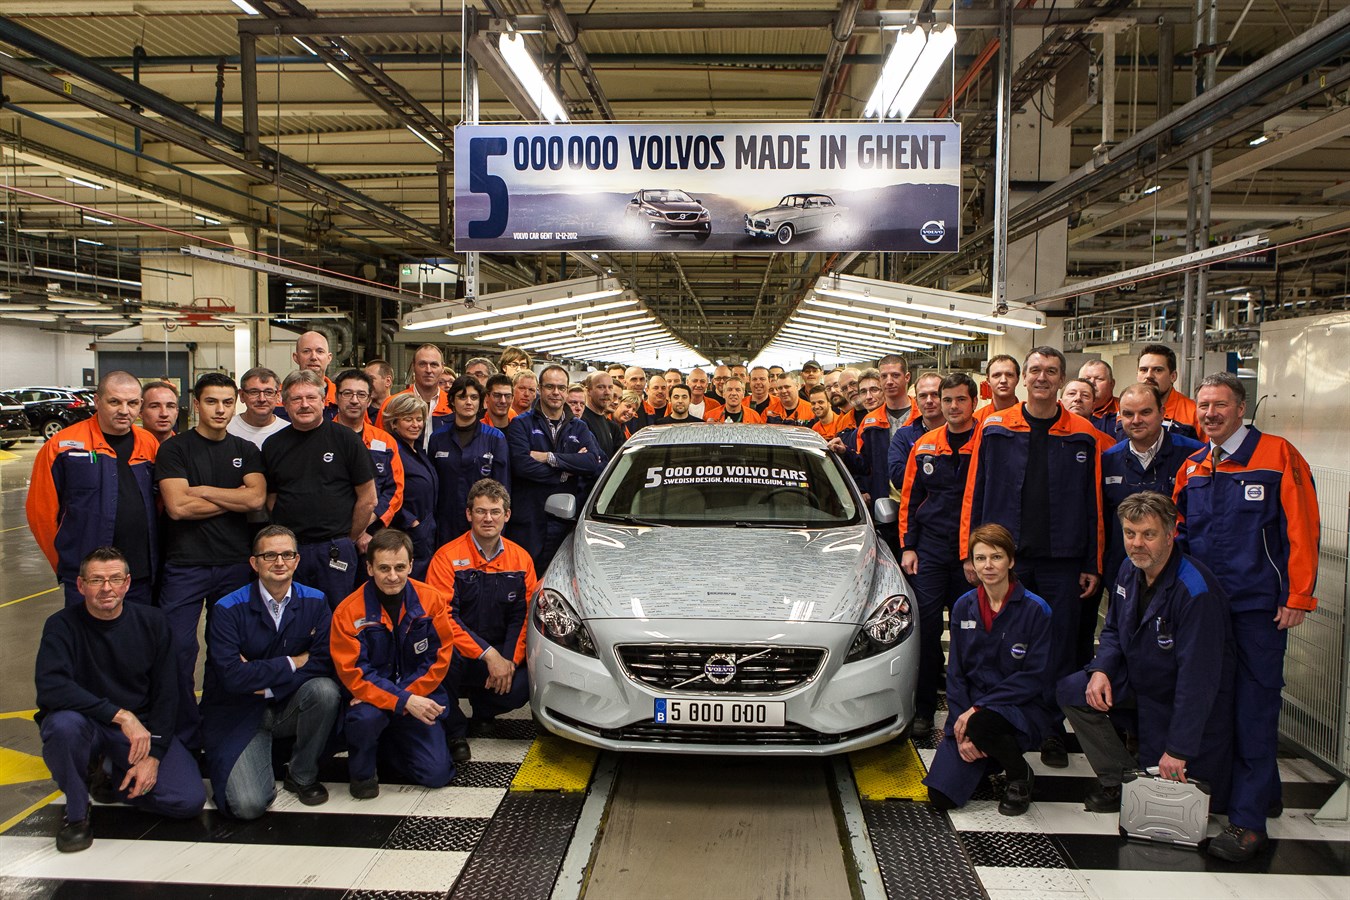 Five million Volvo cars built in Ghent